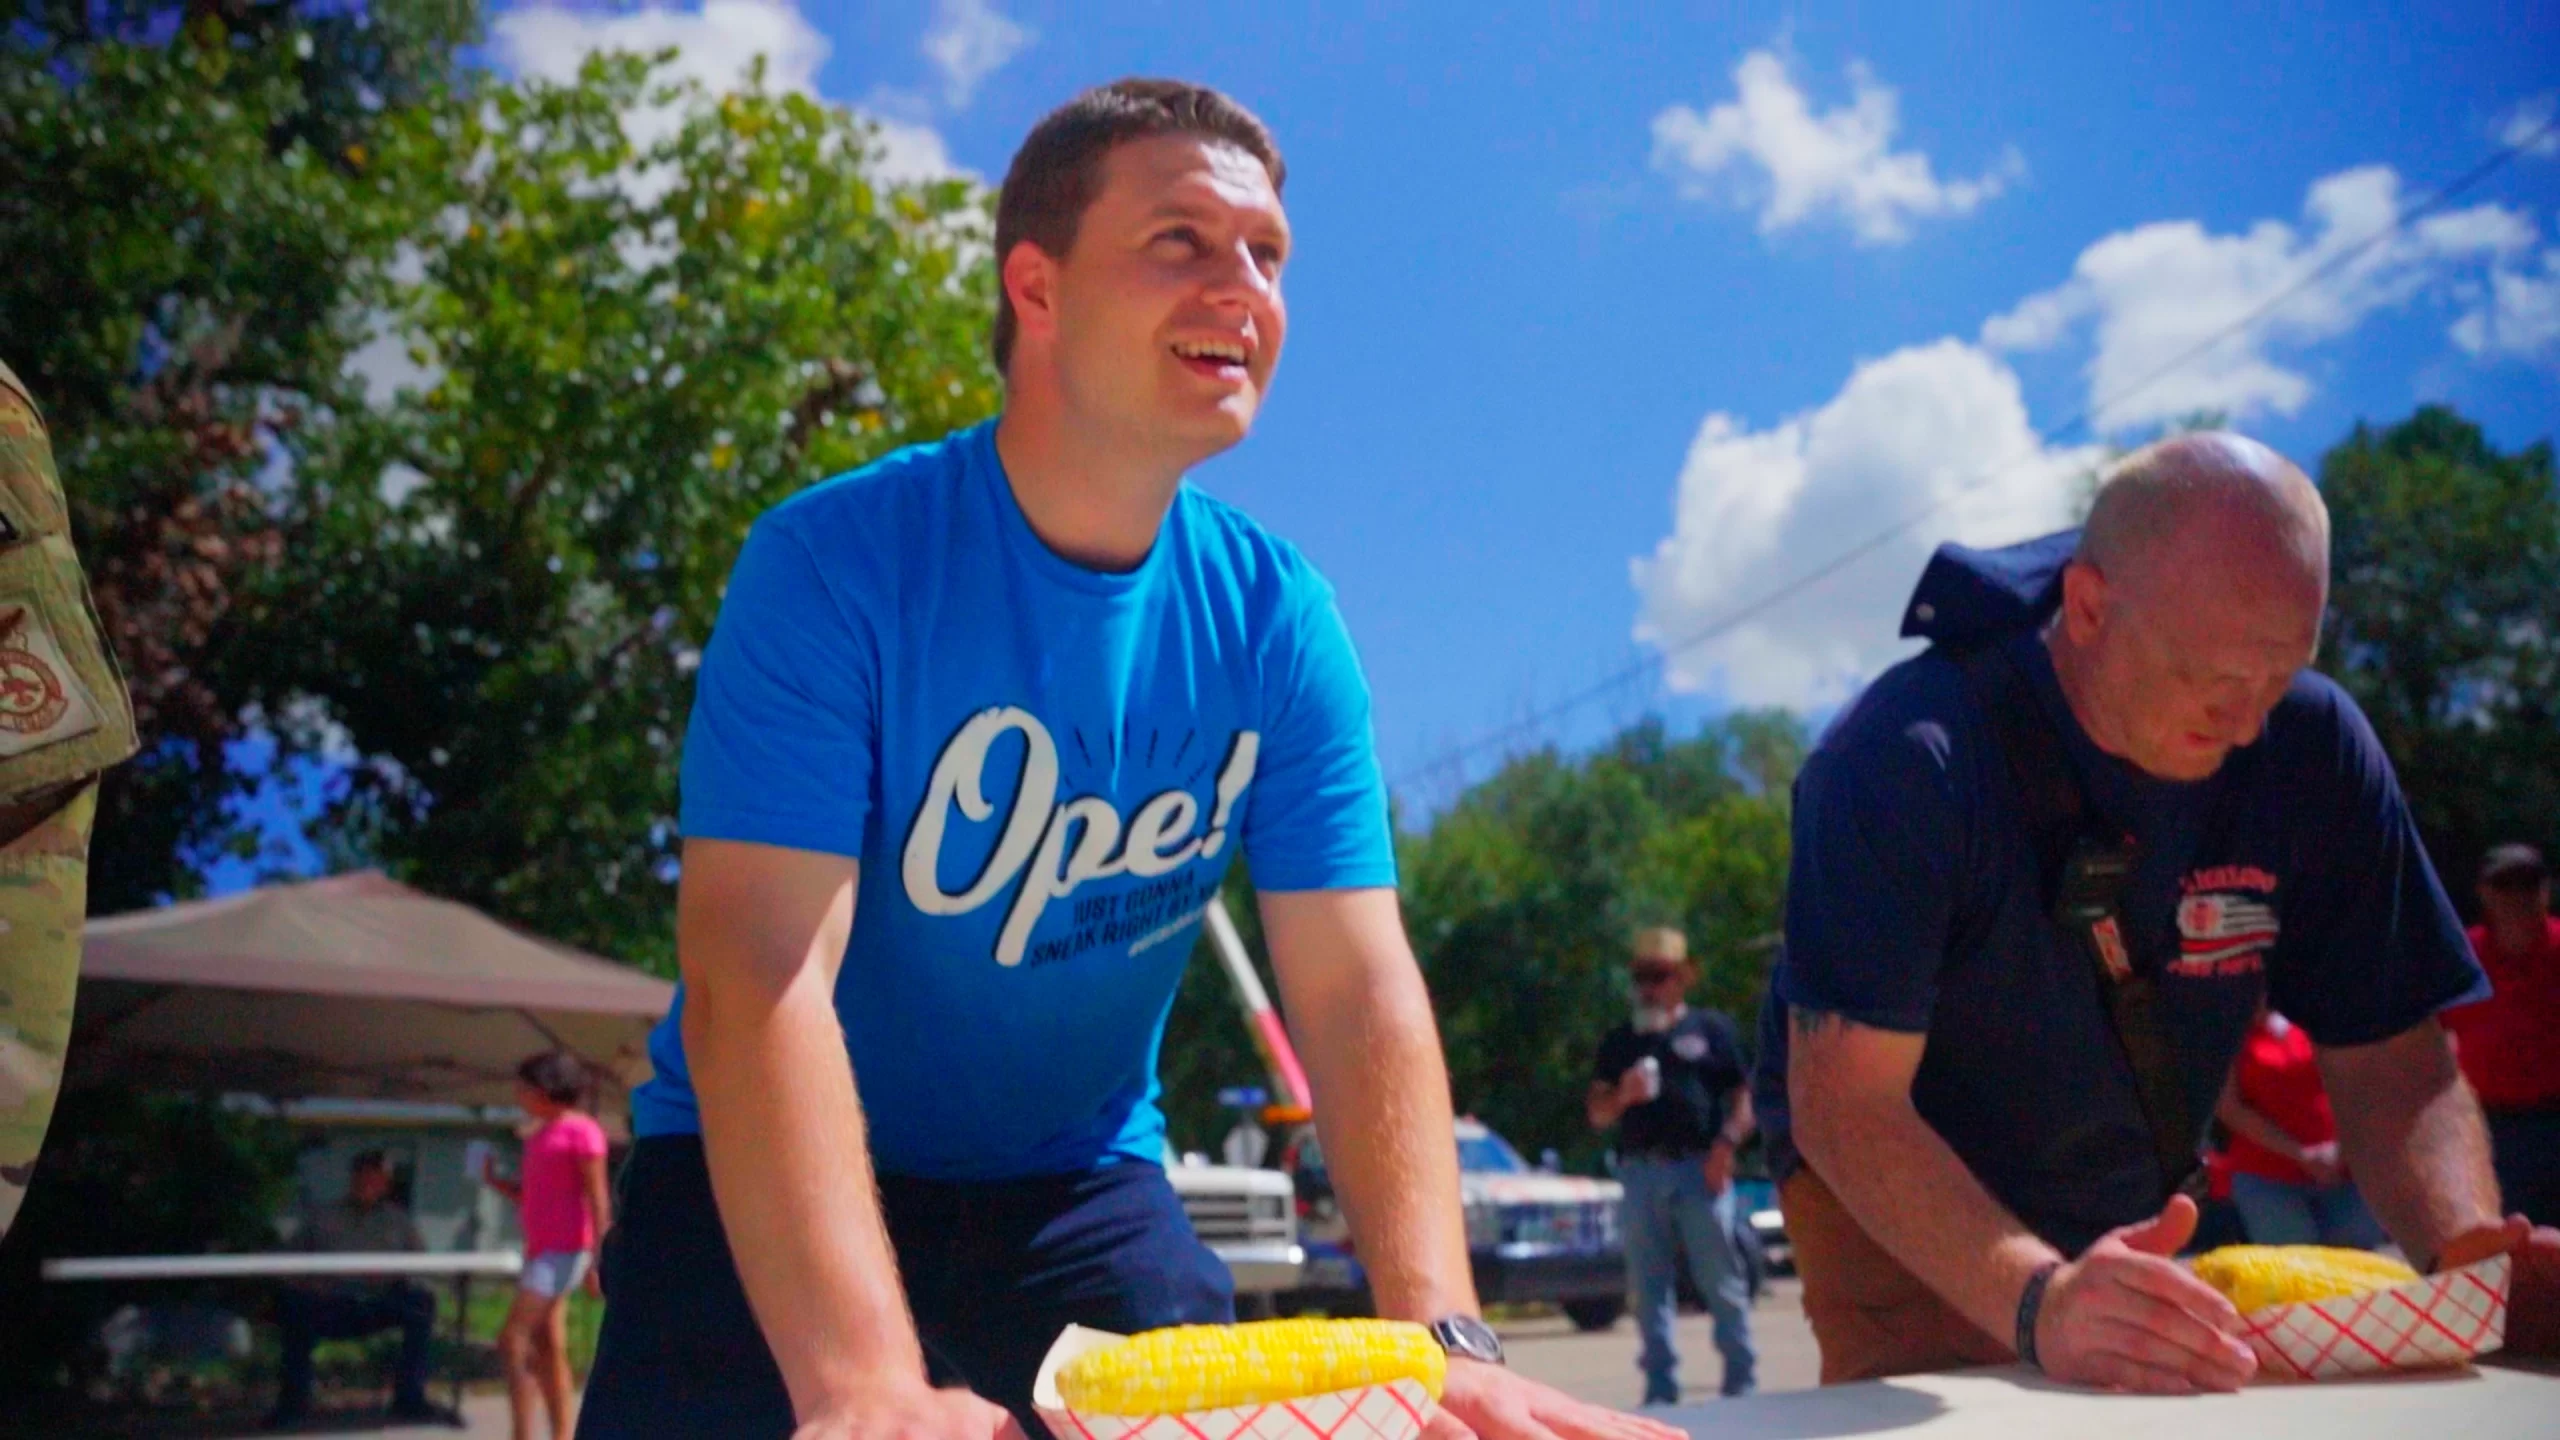 Grand Forks is Cooler article picture. Colin wears blue shirt that reads "Ope!" and participates in Emerado Corn Feed.